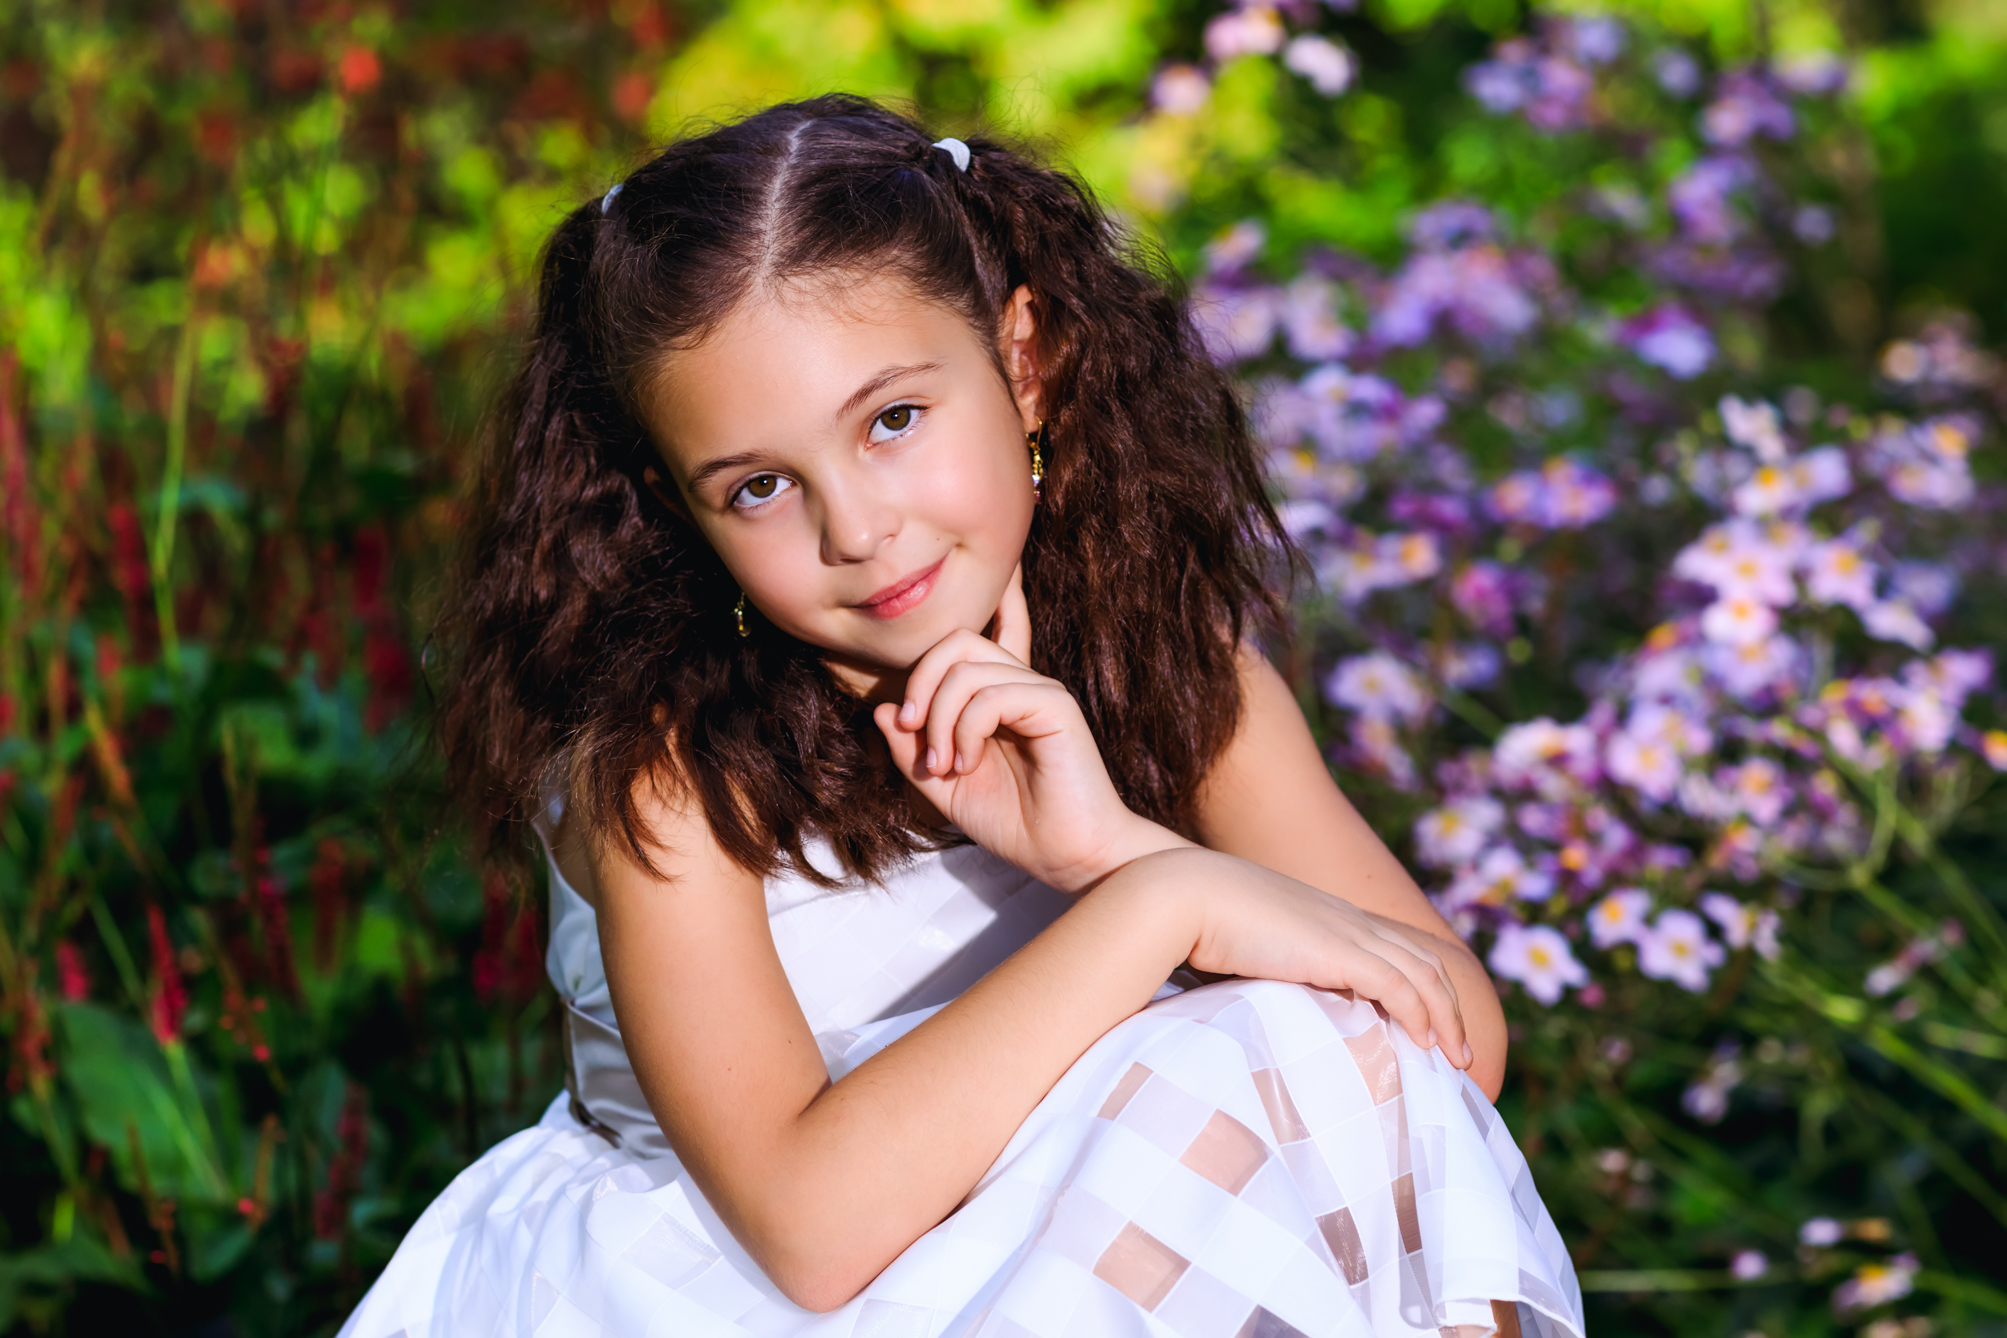 Kids shooting with best photographers and professional videographers team – VIO IMAGE